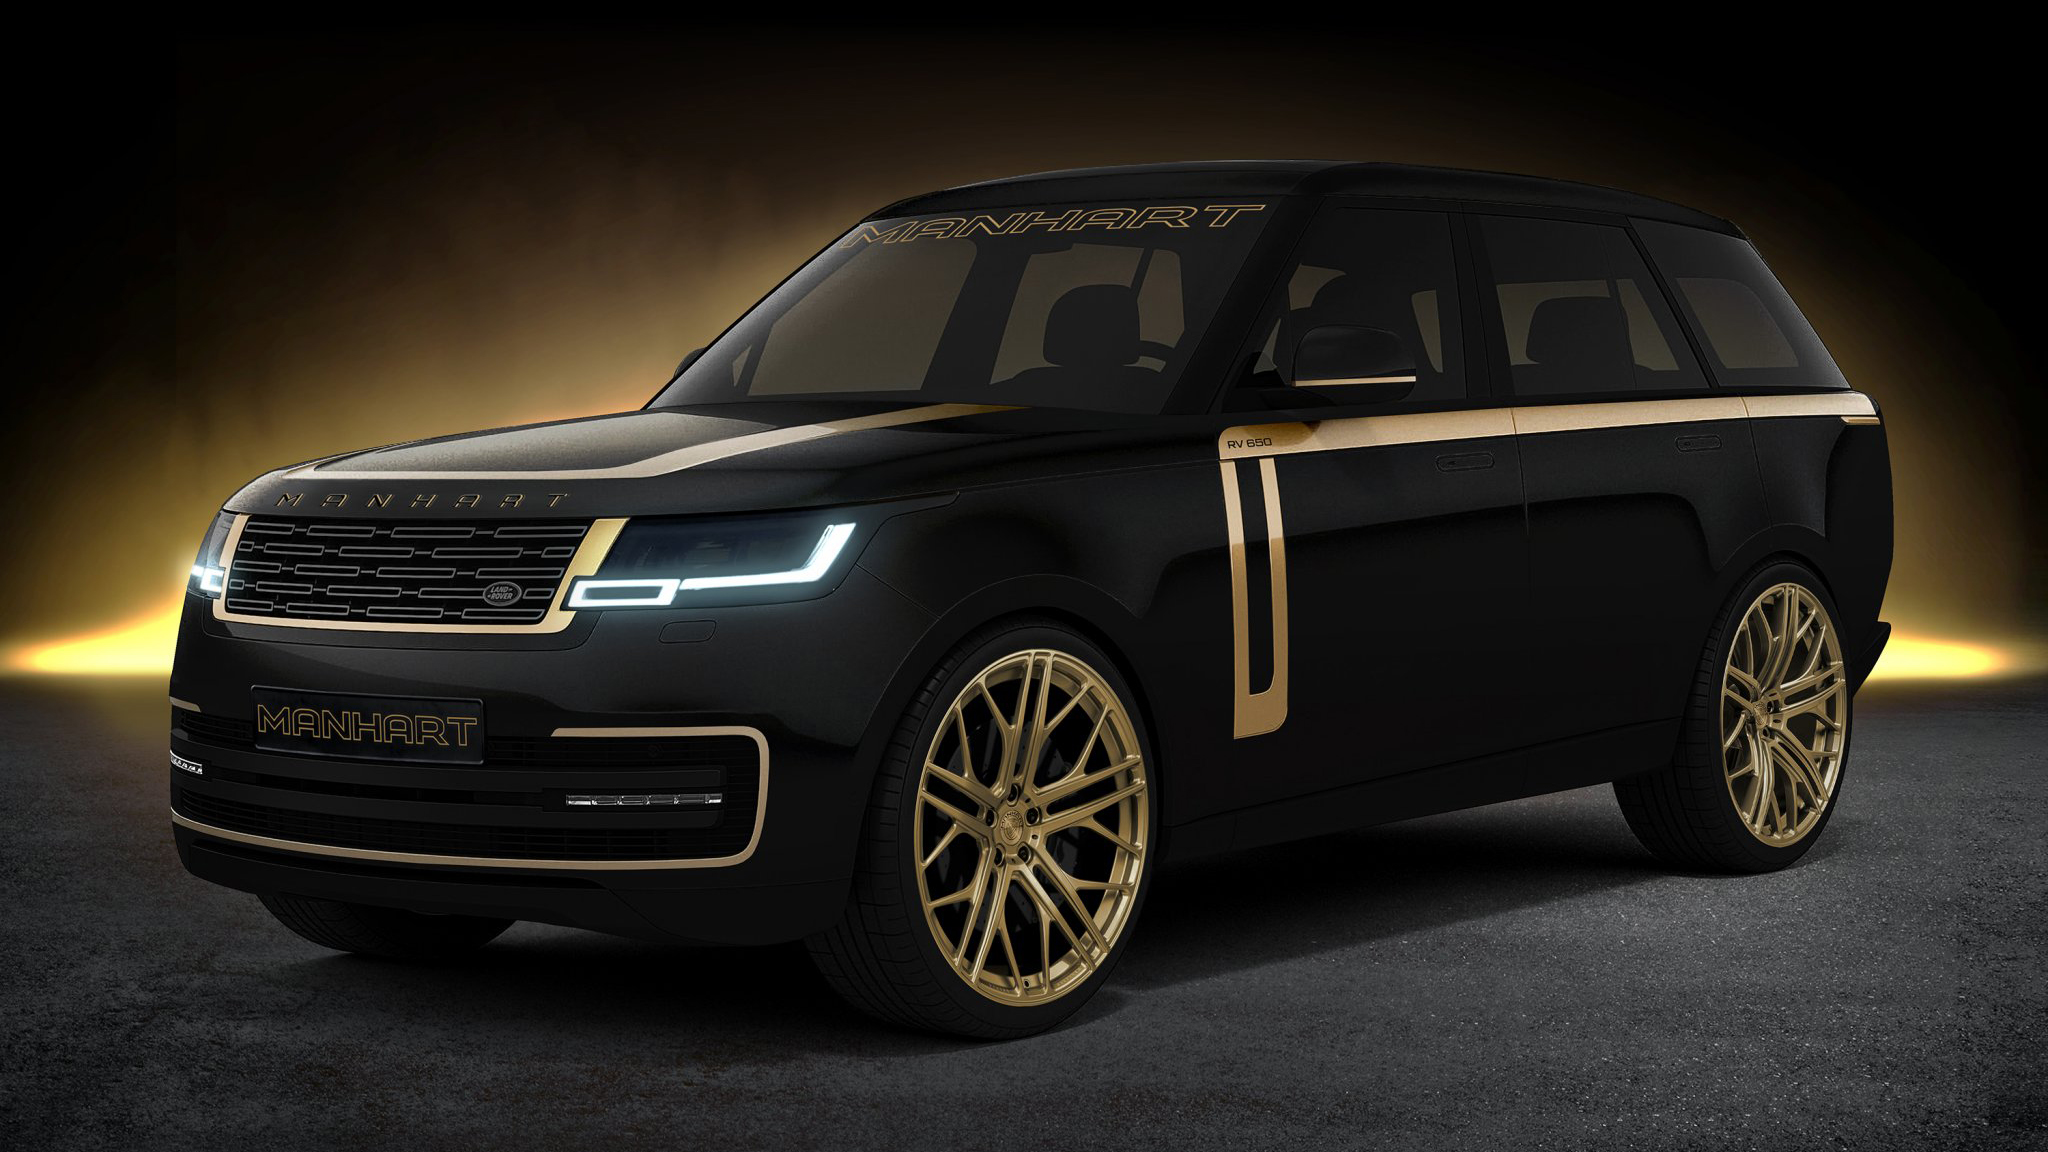 This is what Manhart wants to do to the new Range Rover